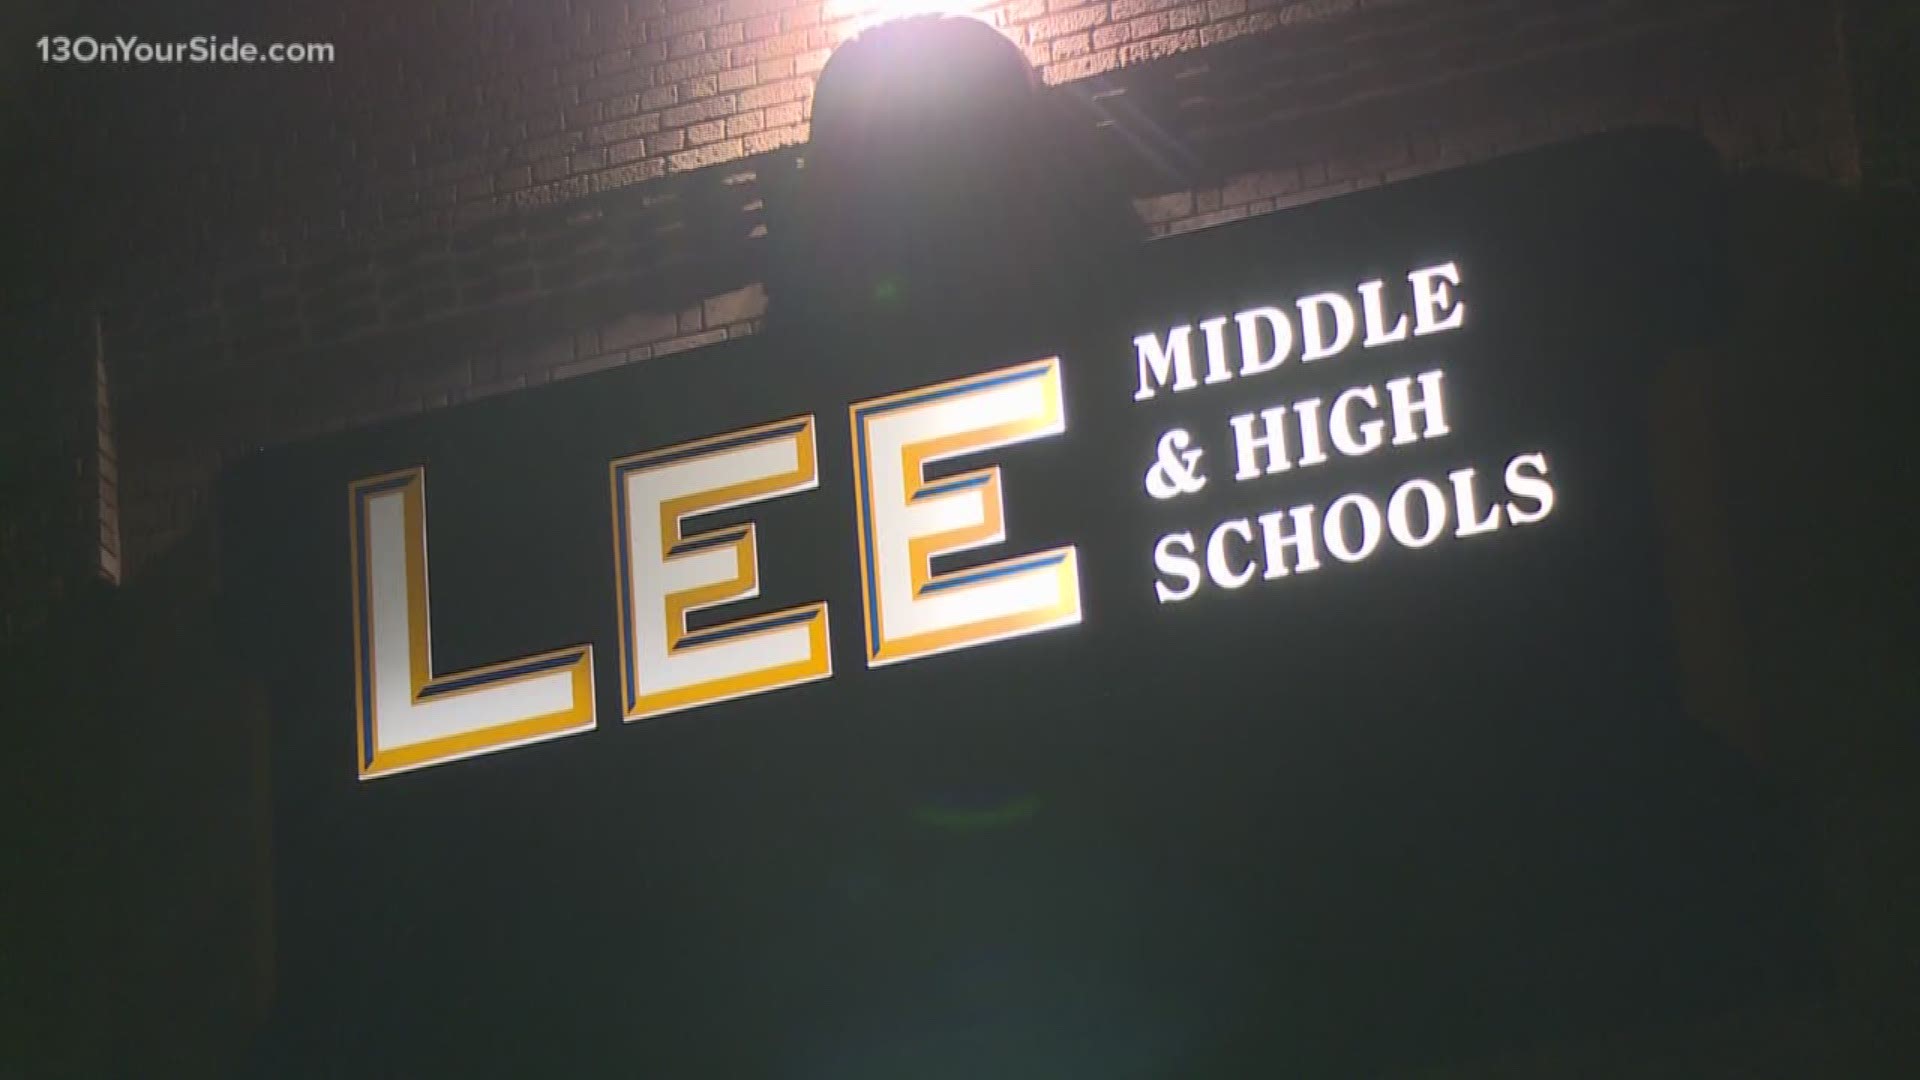 After months of deliberation and design process, the Godfrey-Lee Public Schools officially has a new mascot. Formerly known as the "Rebels," the district's new name the "Legends" will go into effect in the 2020-2021 school year.